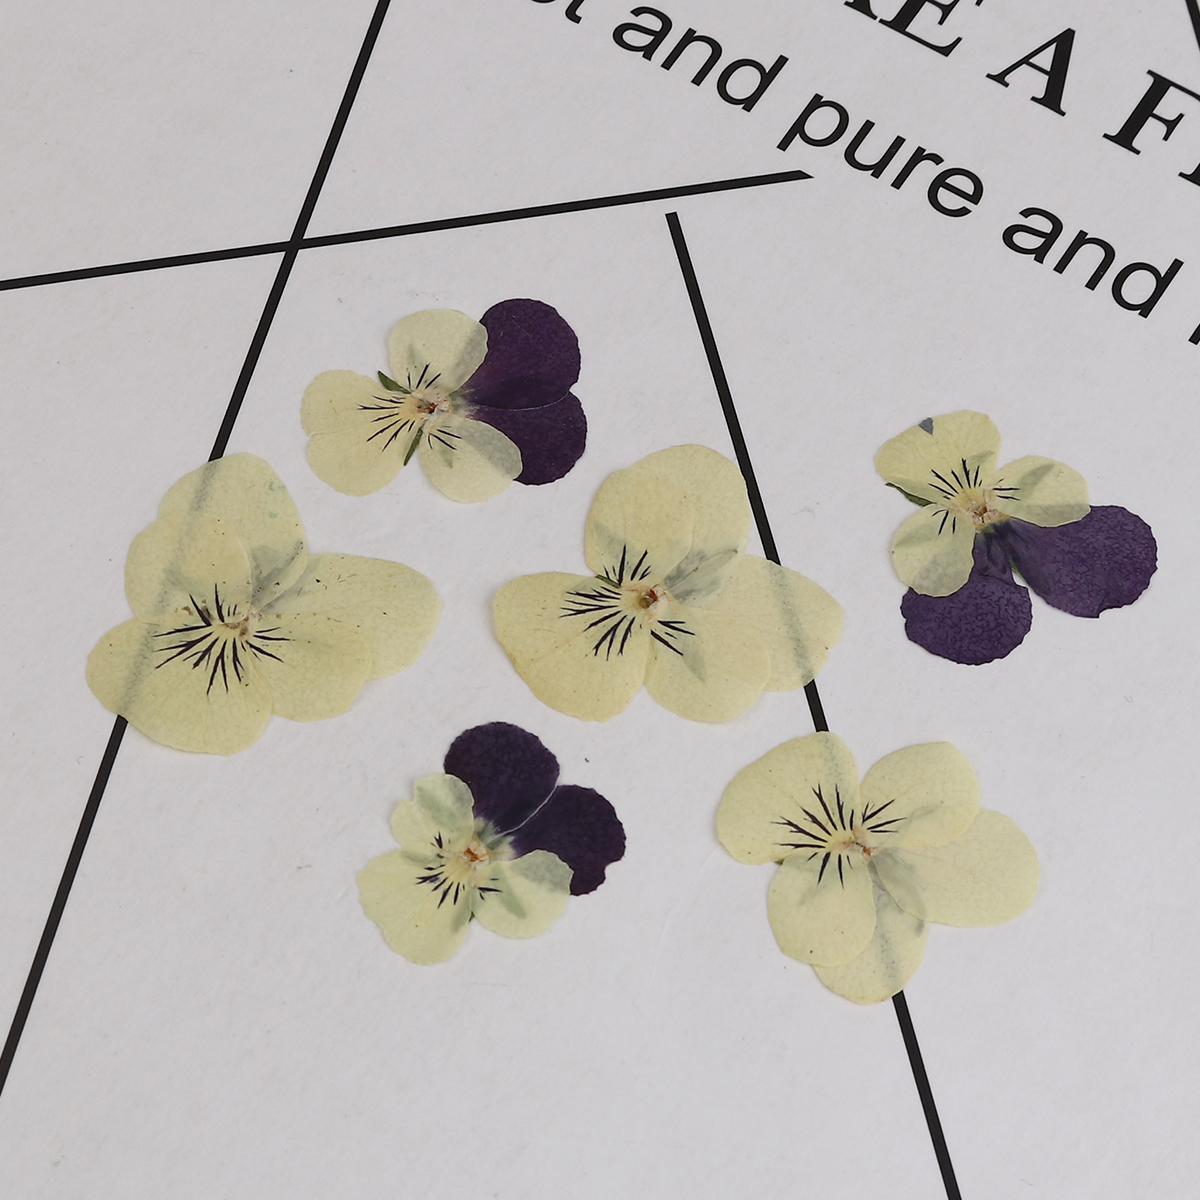 Picture of Real Dried Flower Resin Jewelry DIY Making Craft Yellow Pansy 30mm x26mm(1 1/8" x1") - 22mm x22mm( 7/8" x 7/8"), 1 Packet ( 12 PCs/Packet)